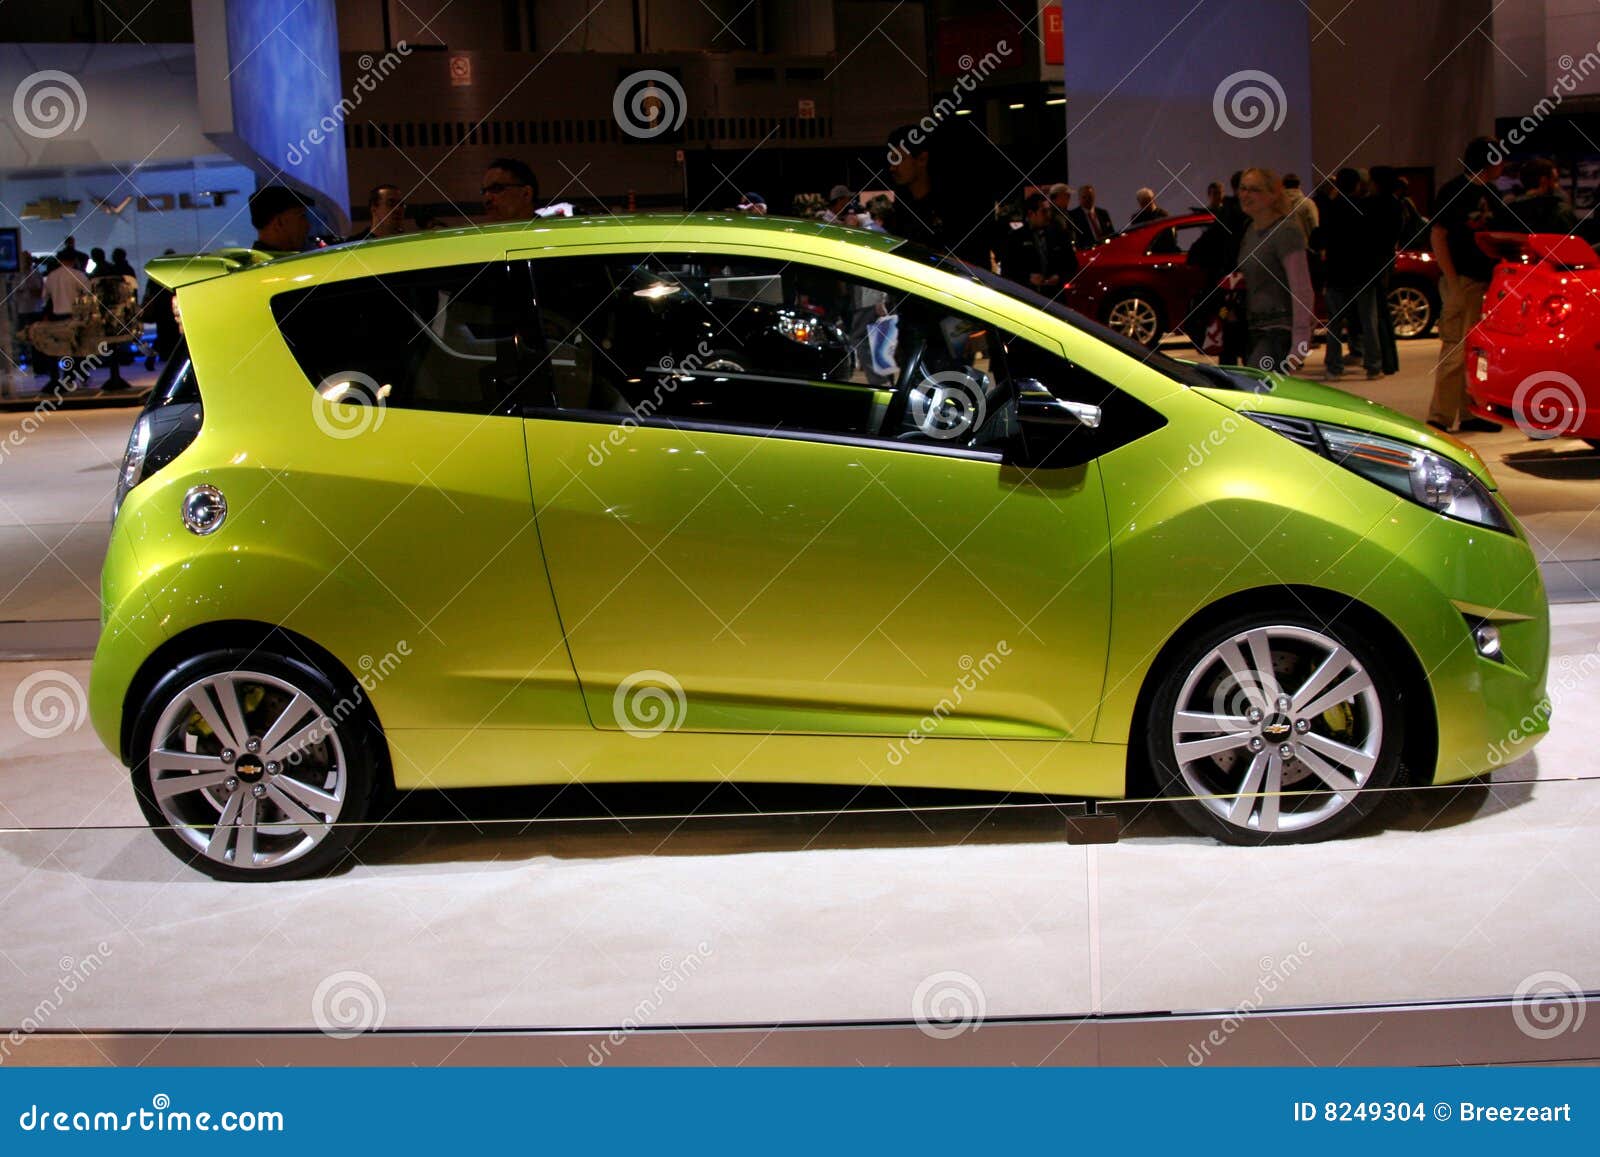 The 2011 CHEVROLET SPARK editorial stock image. Image of auto - 8249304